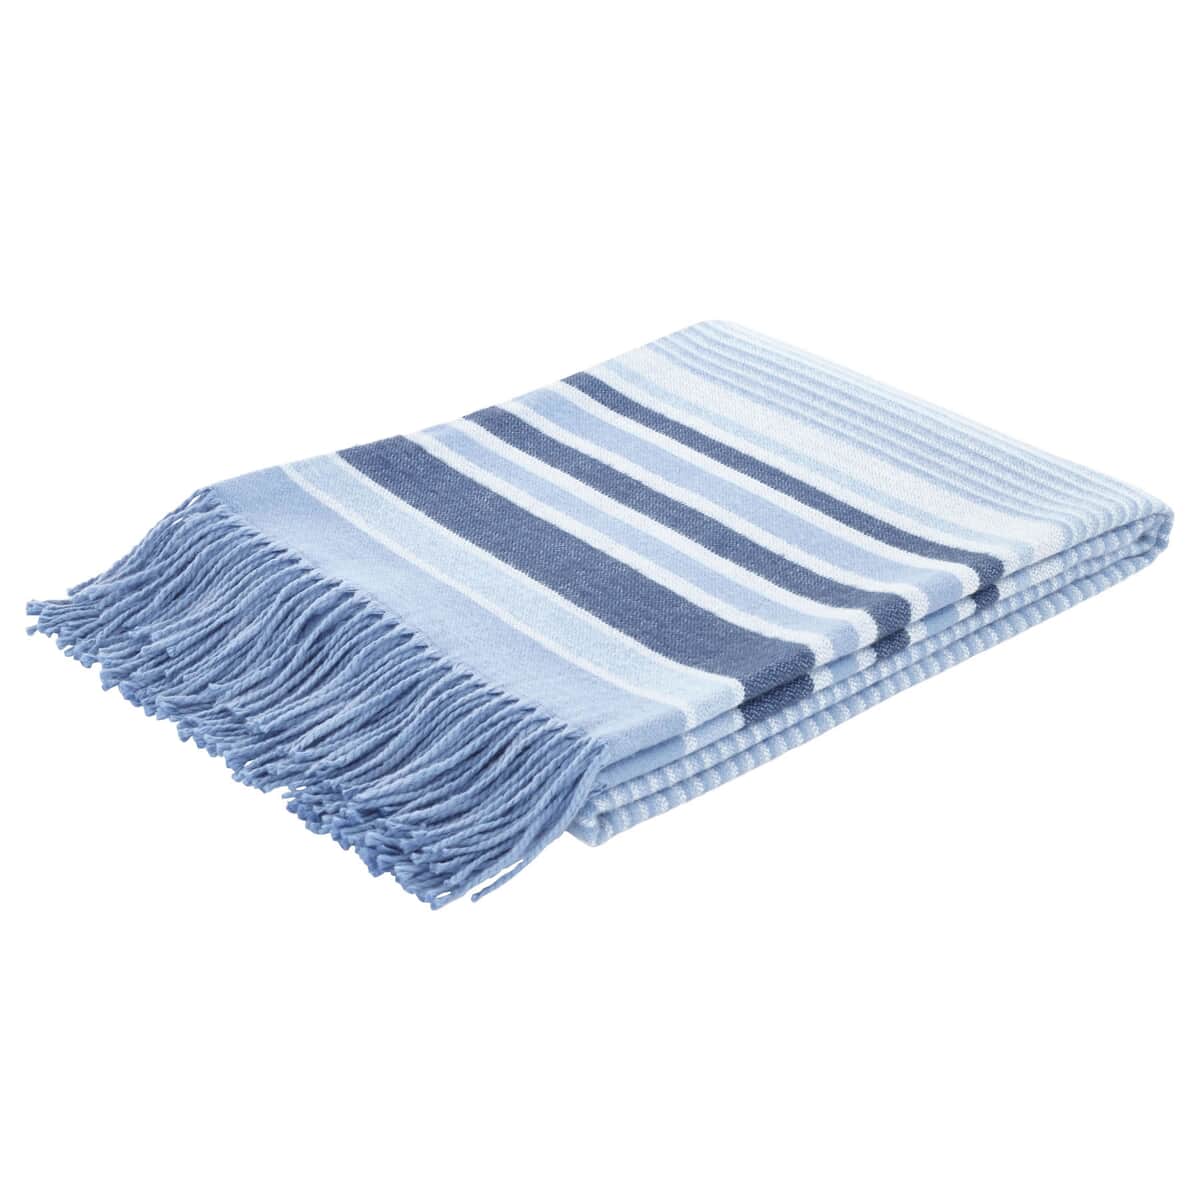 Catherine Lansfield Woven Striped Blanket Blue large